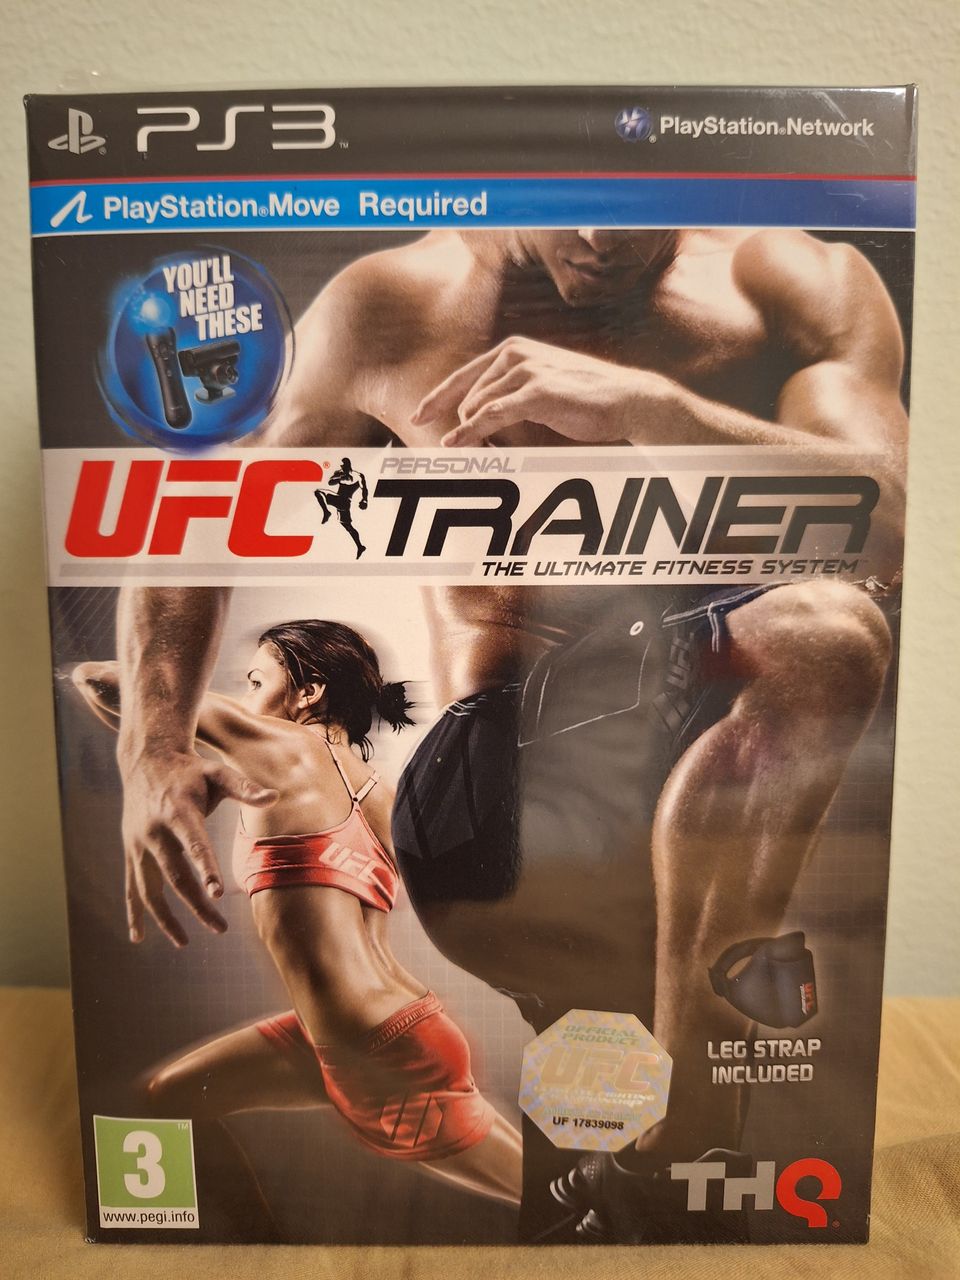 Personal UFC Trainer - The Ultimate Firness System